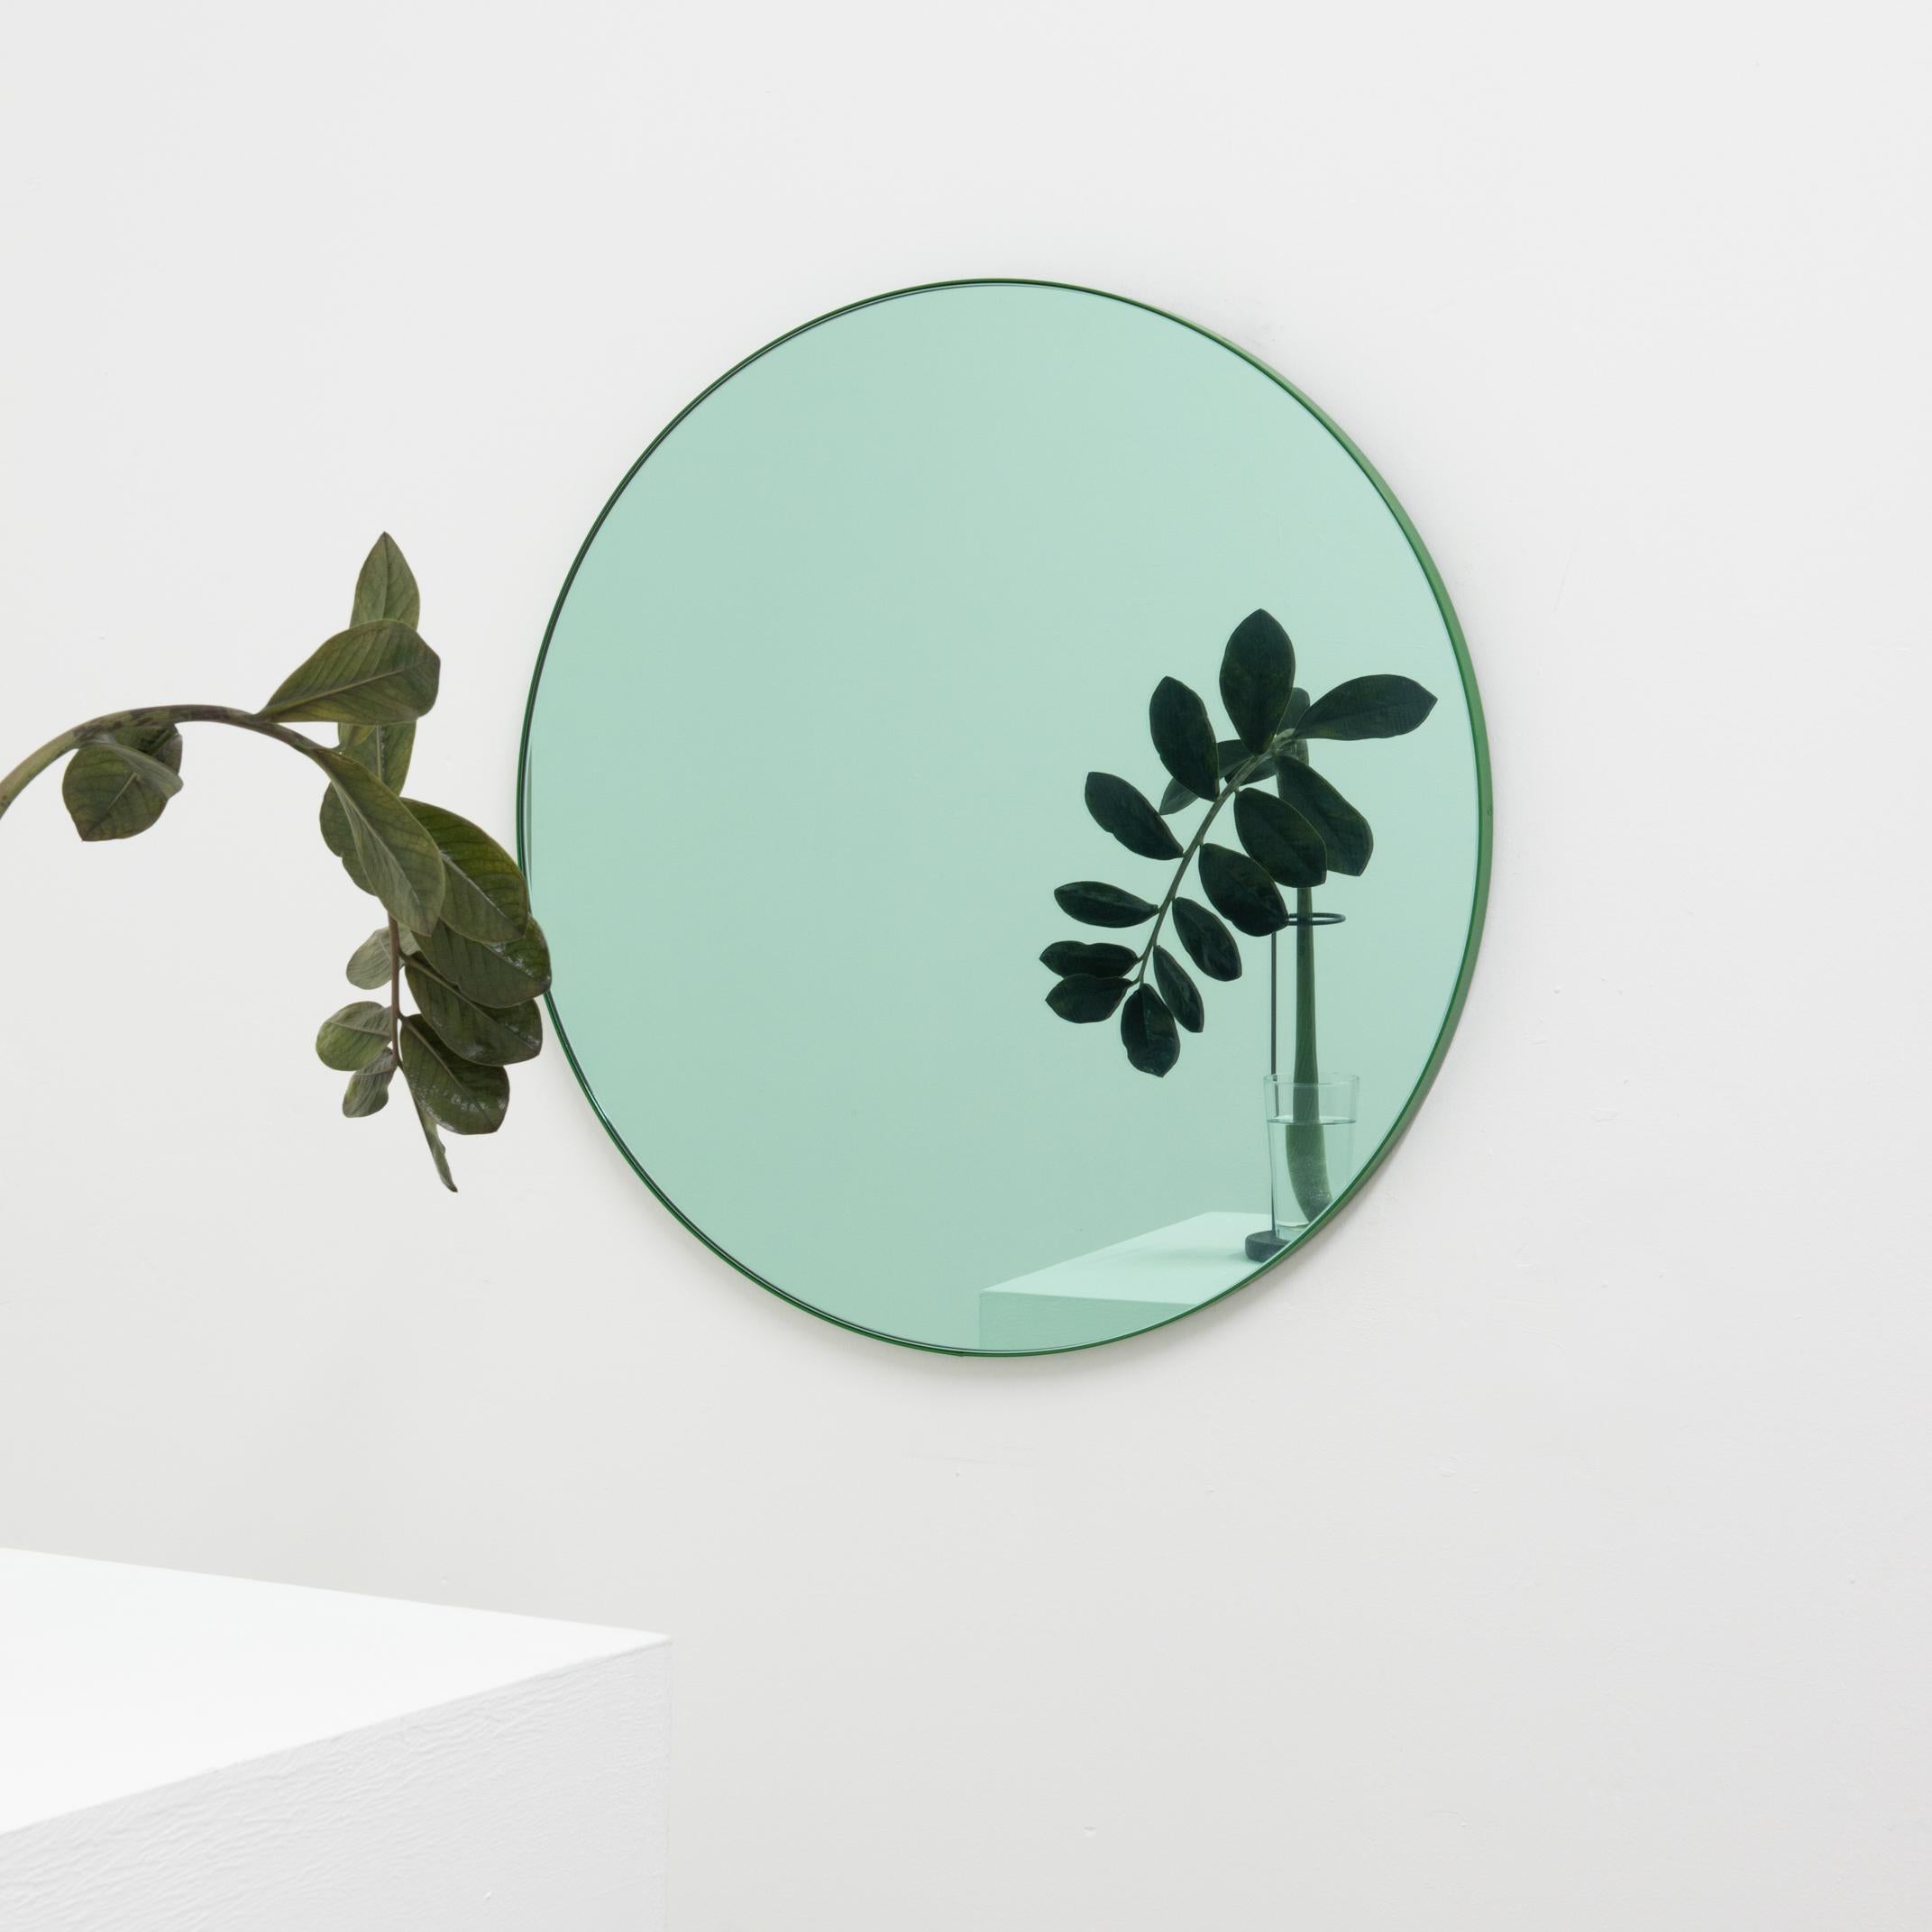 Orbis Green Tinted Modern Round Mirror with Green Frame - Medium In New Condition In London, GB